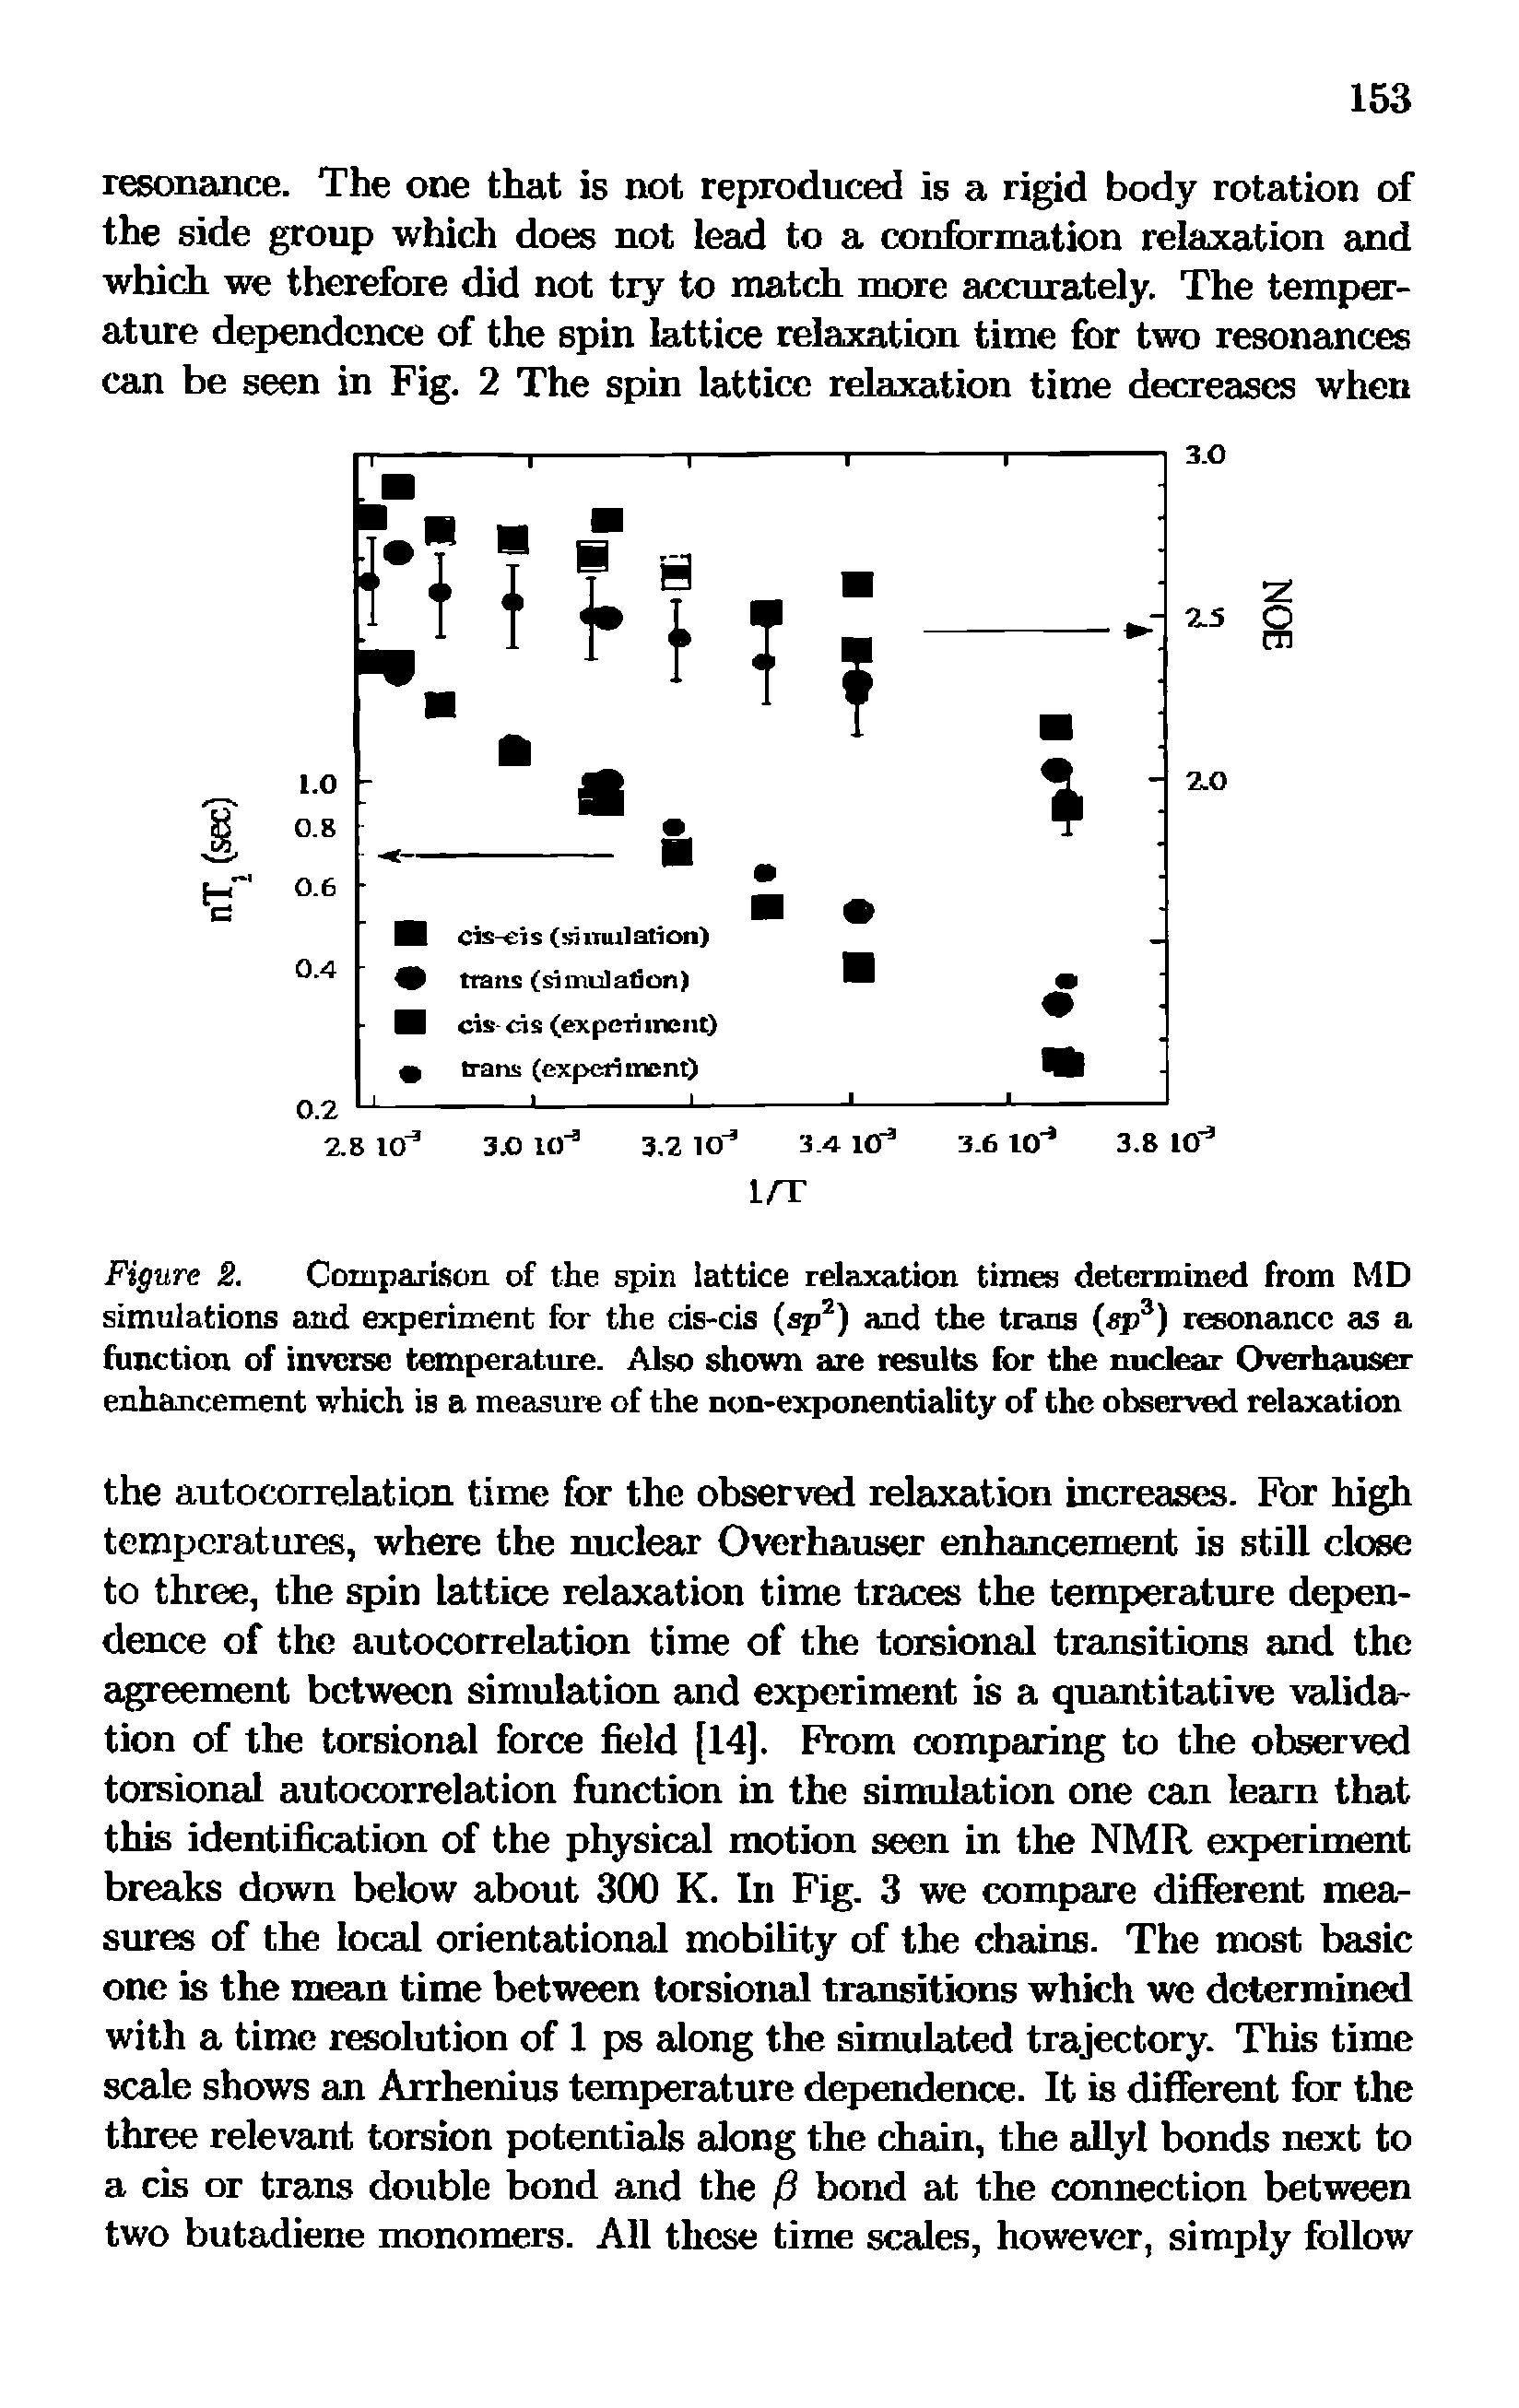 Figure 2. Conipaxison of the spin lattice relaxation times determined from MD simulations and experiment for the cis-cis (sp ) and the trans ( ) resonance as a function of inverse temperature. Also shown are results for the nuclear Overhauser enhancement which is a measure of the non>exponentiality of the observed relaxation...